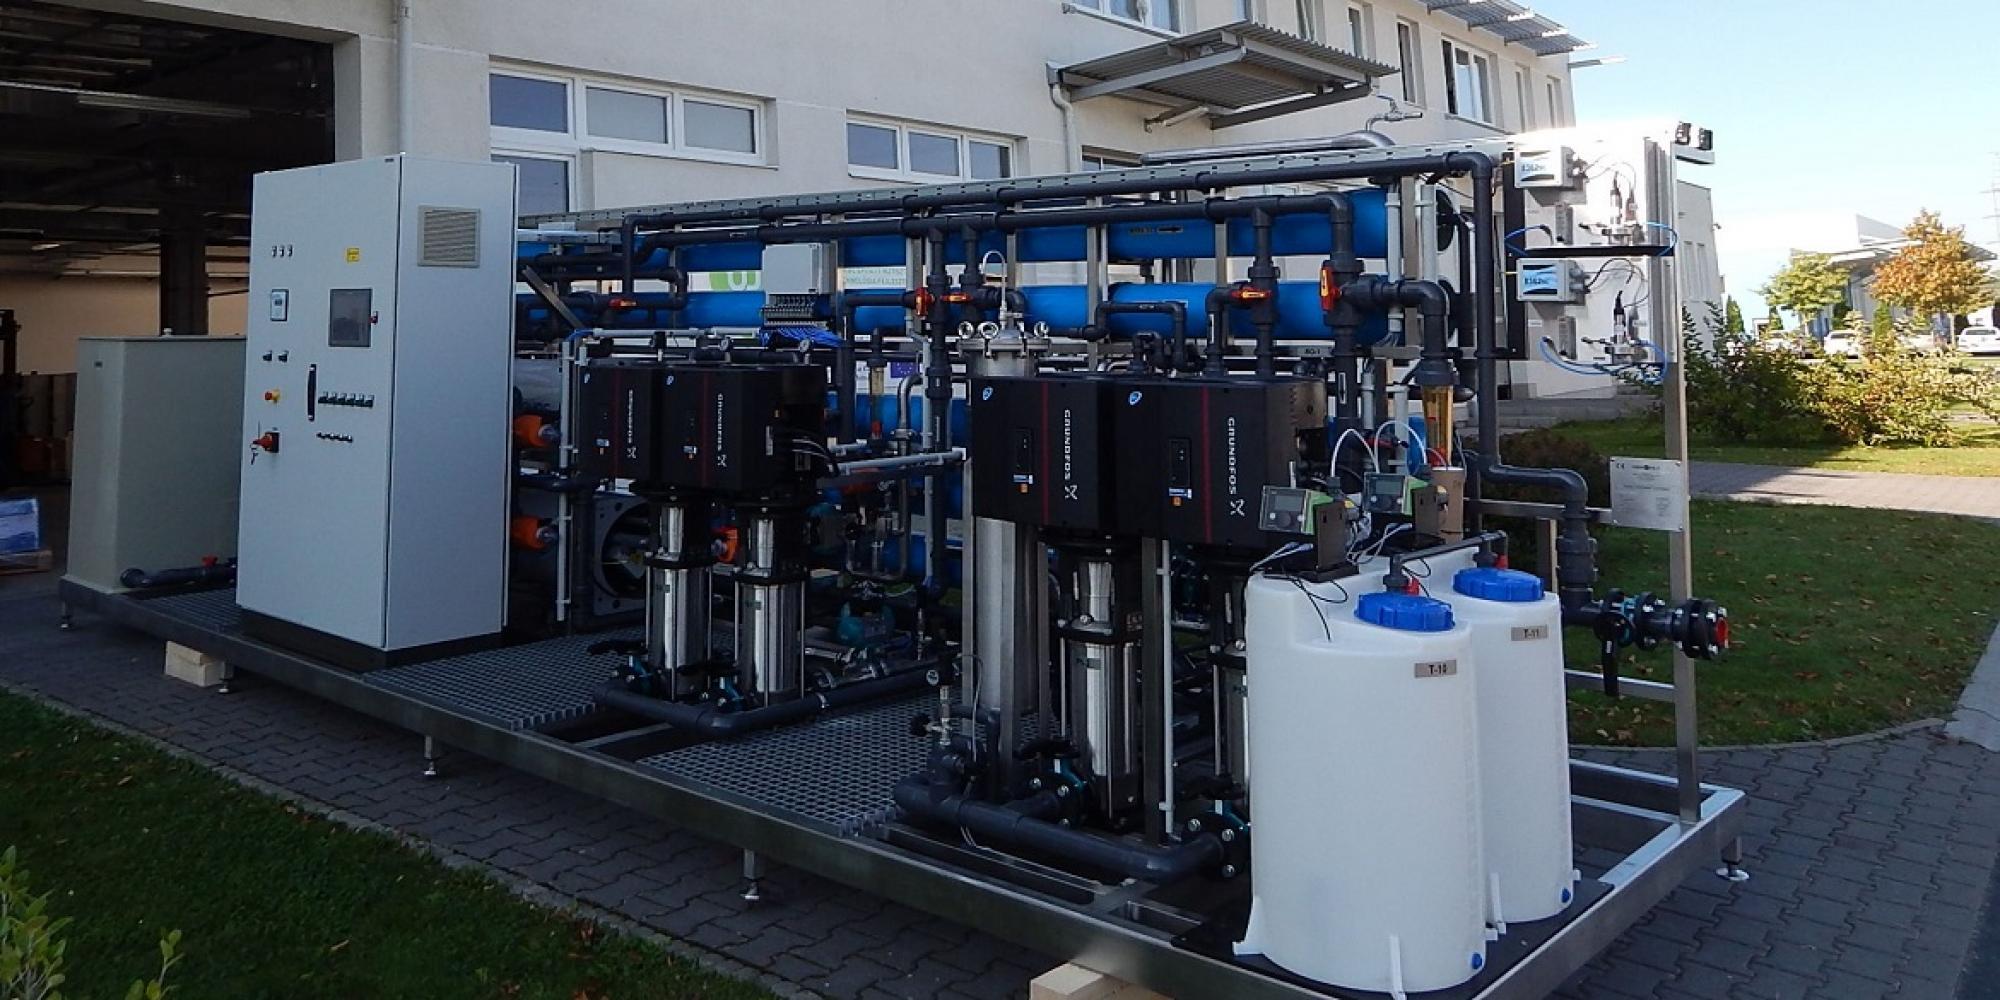 Water softening with a heating system in Croatia